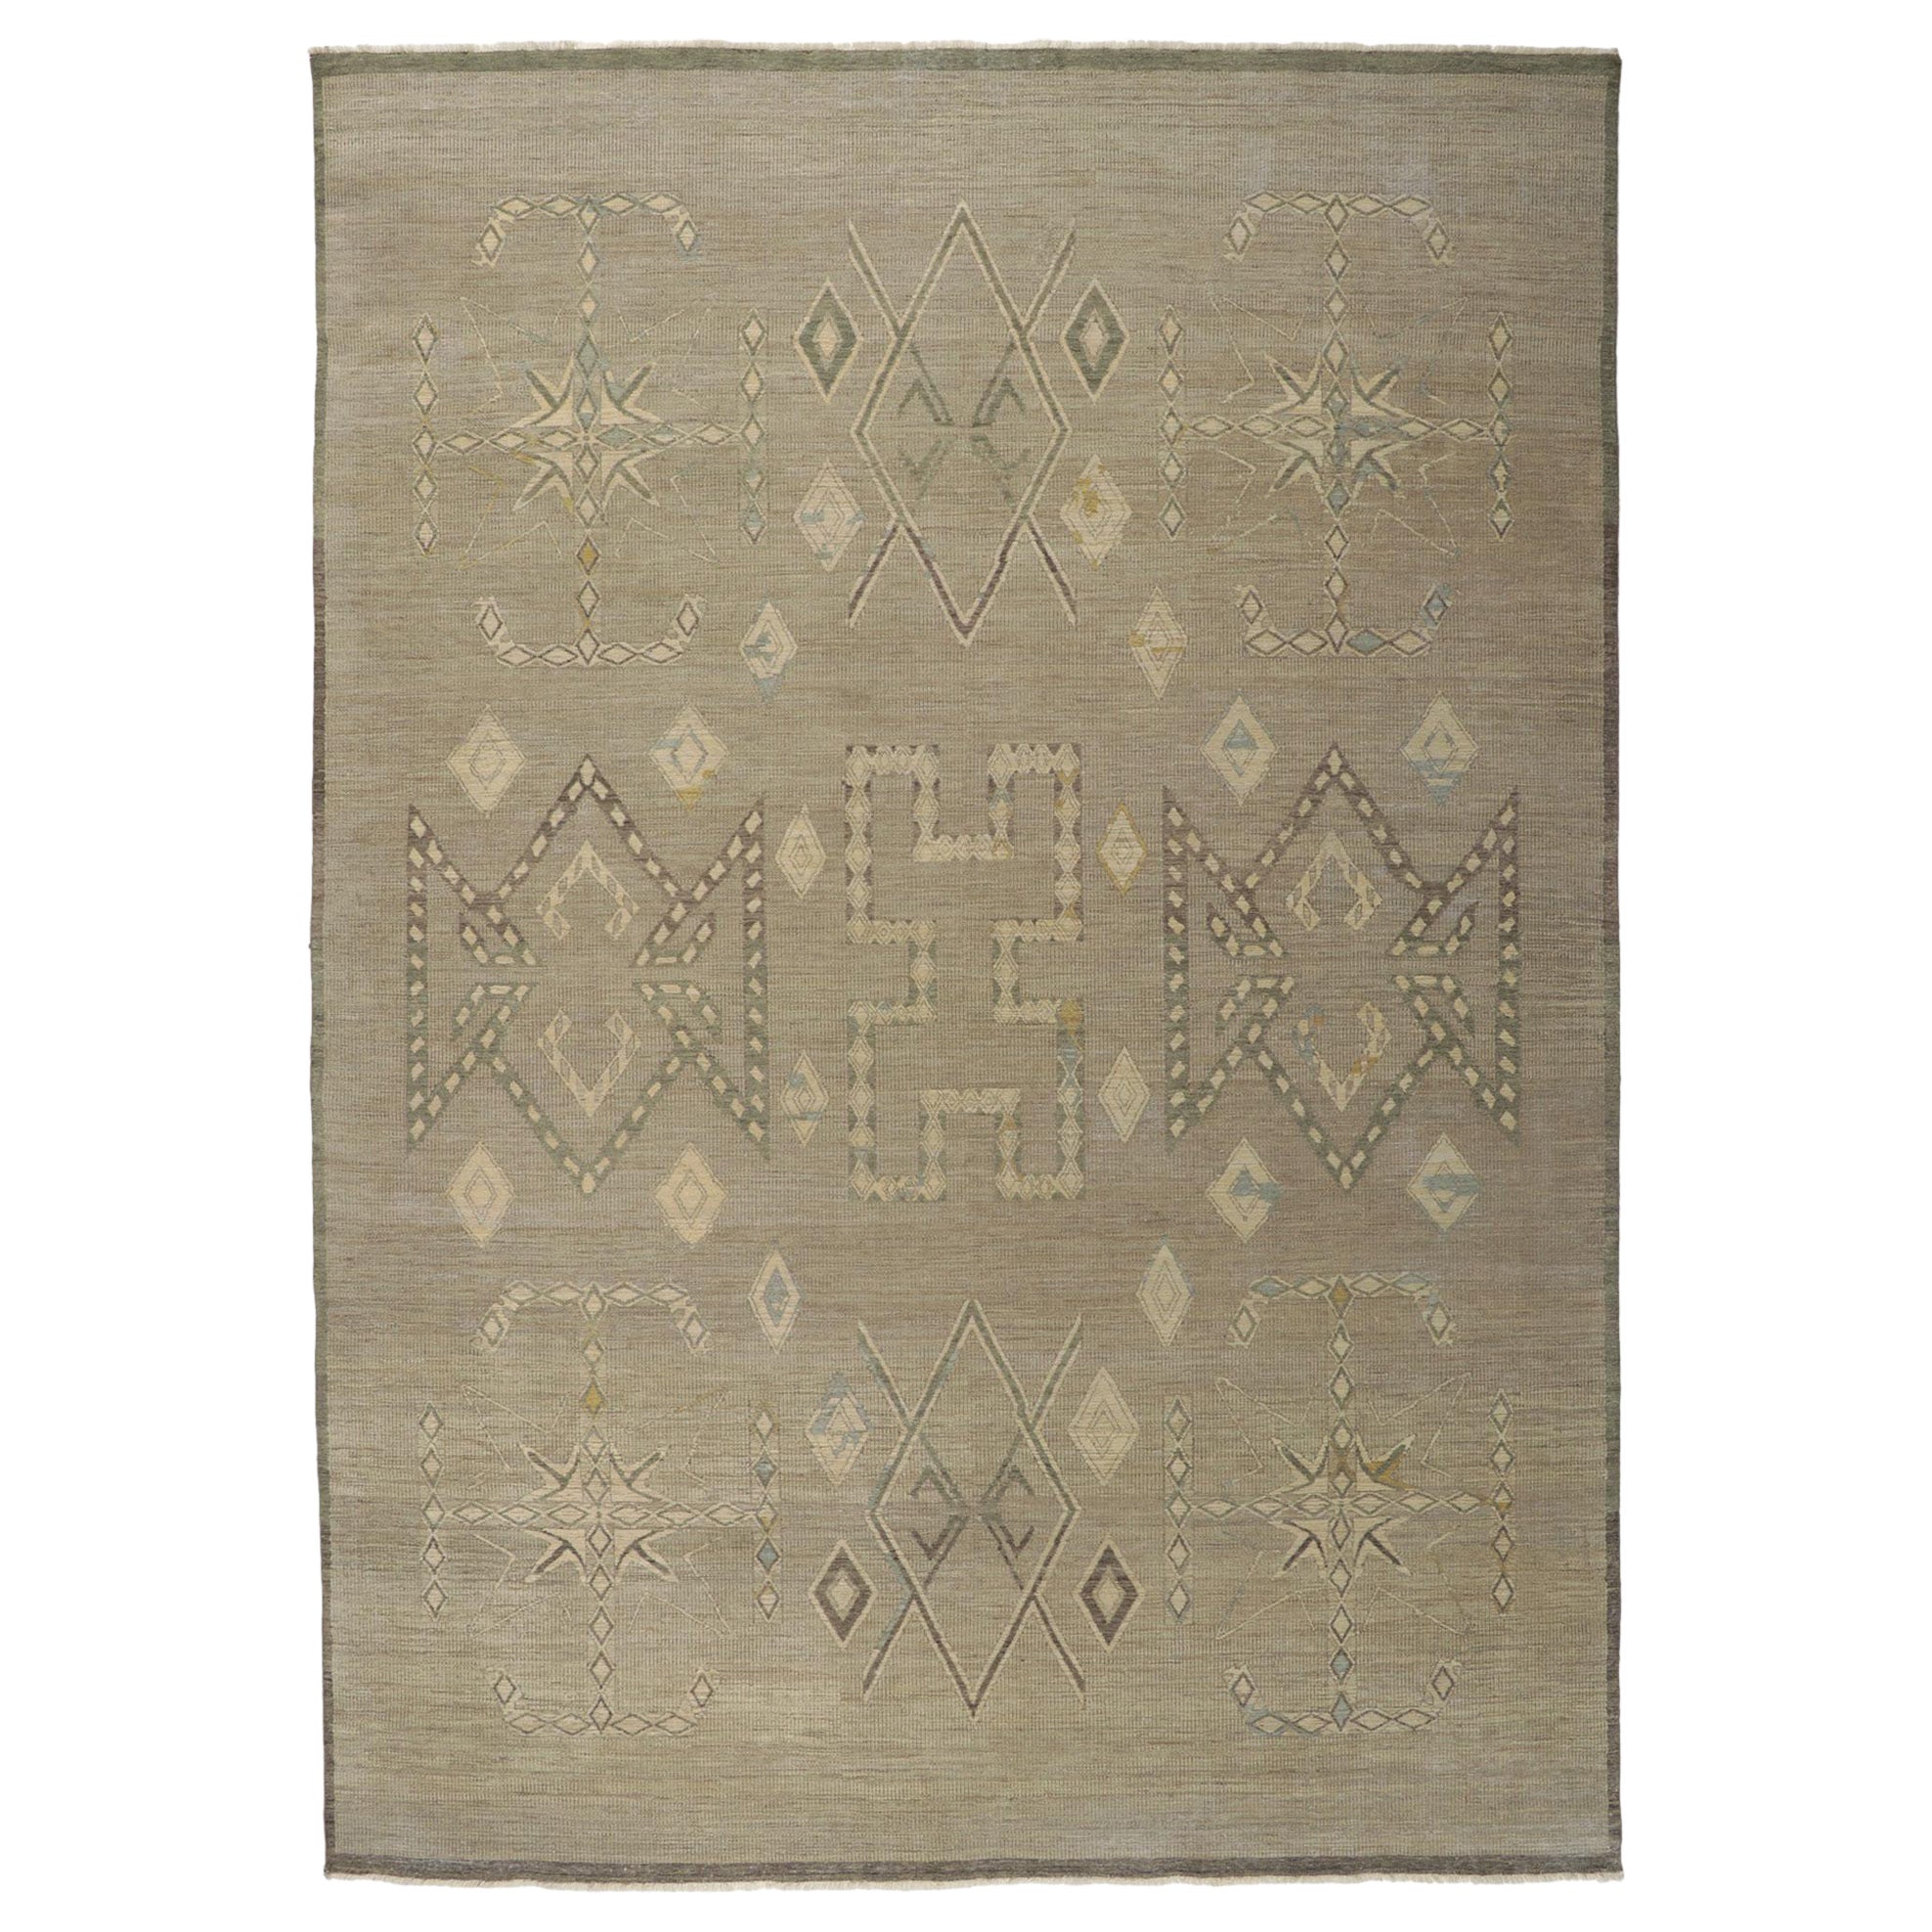 Vintage-Inspired Distressed Rug with Tribal Style 